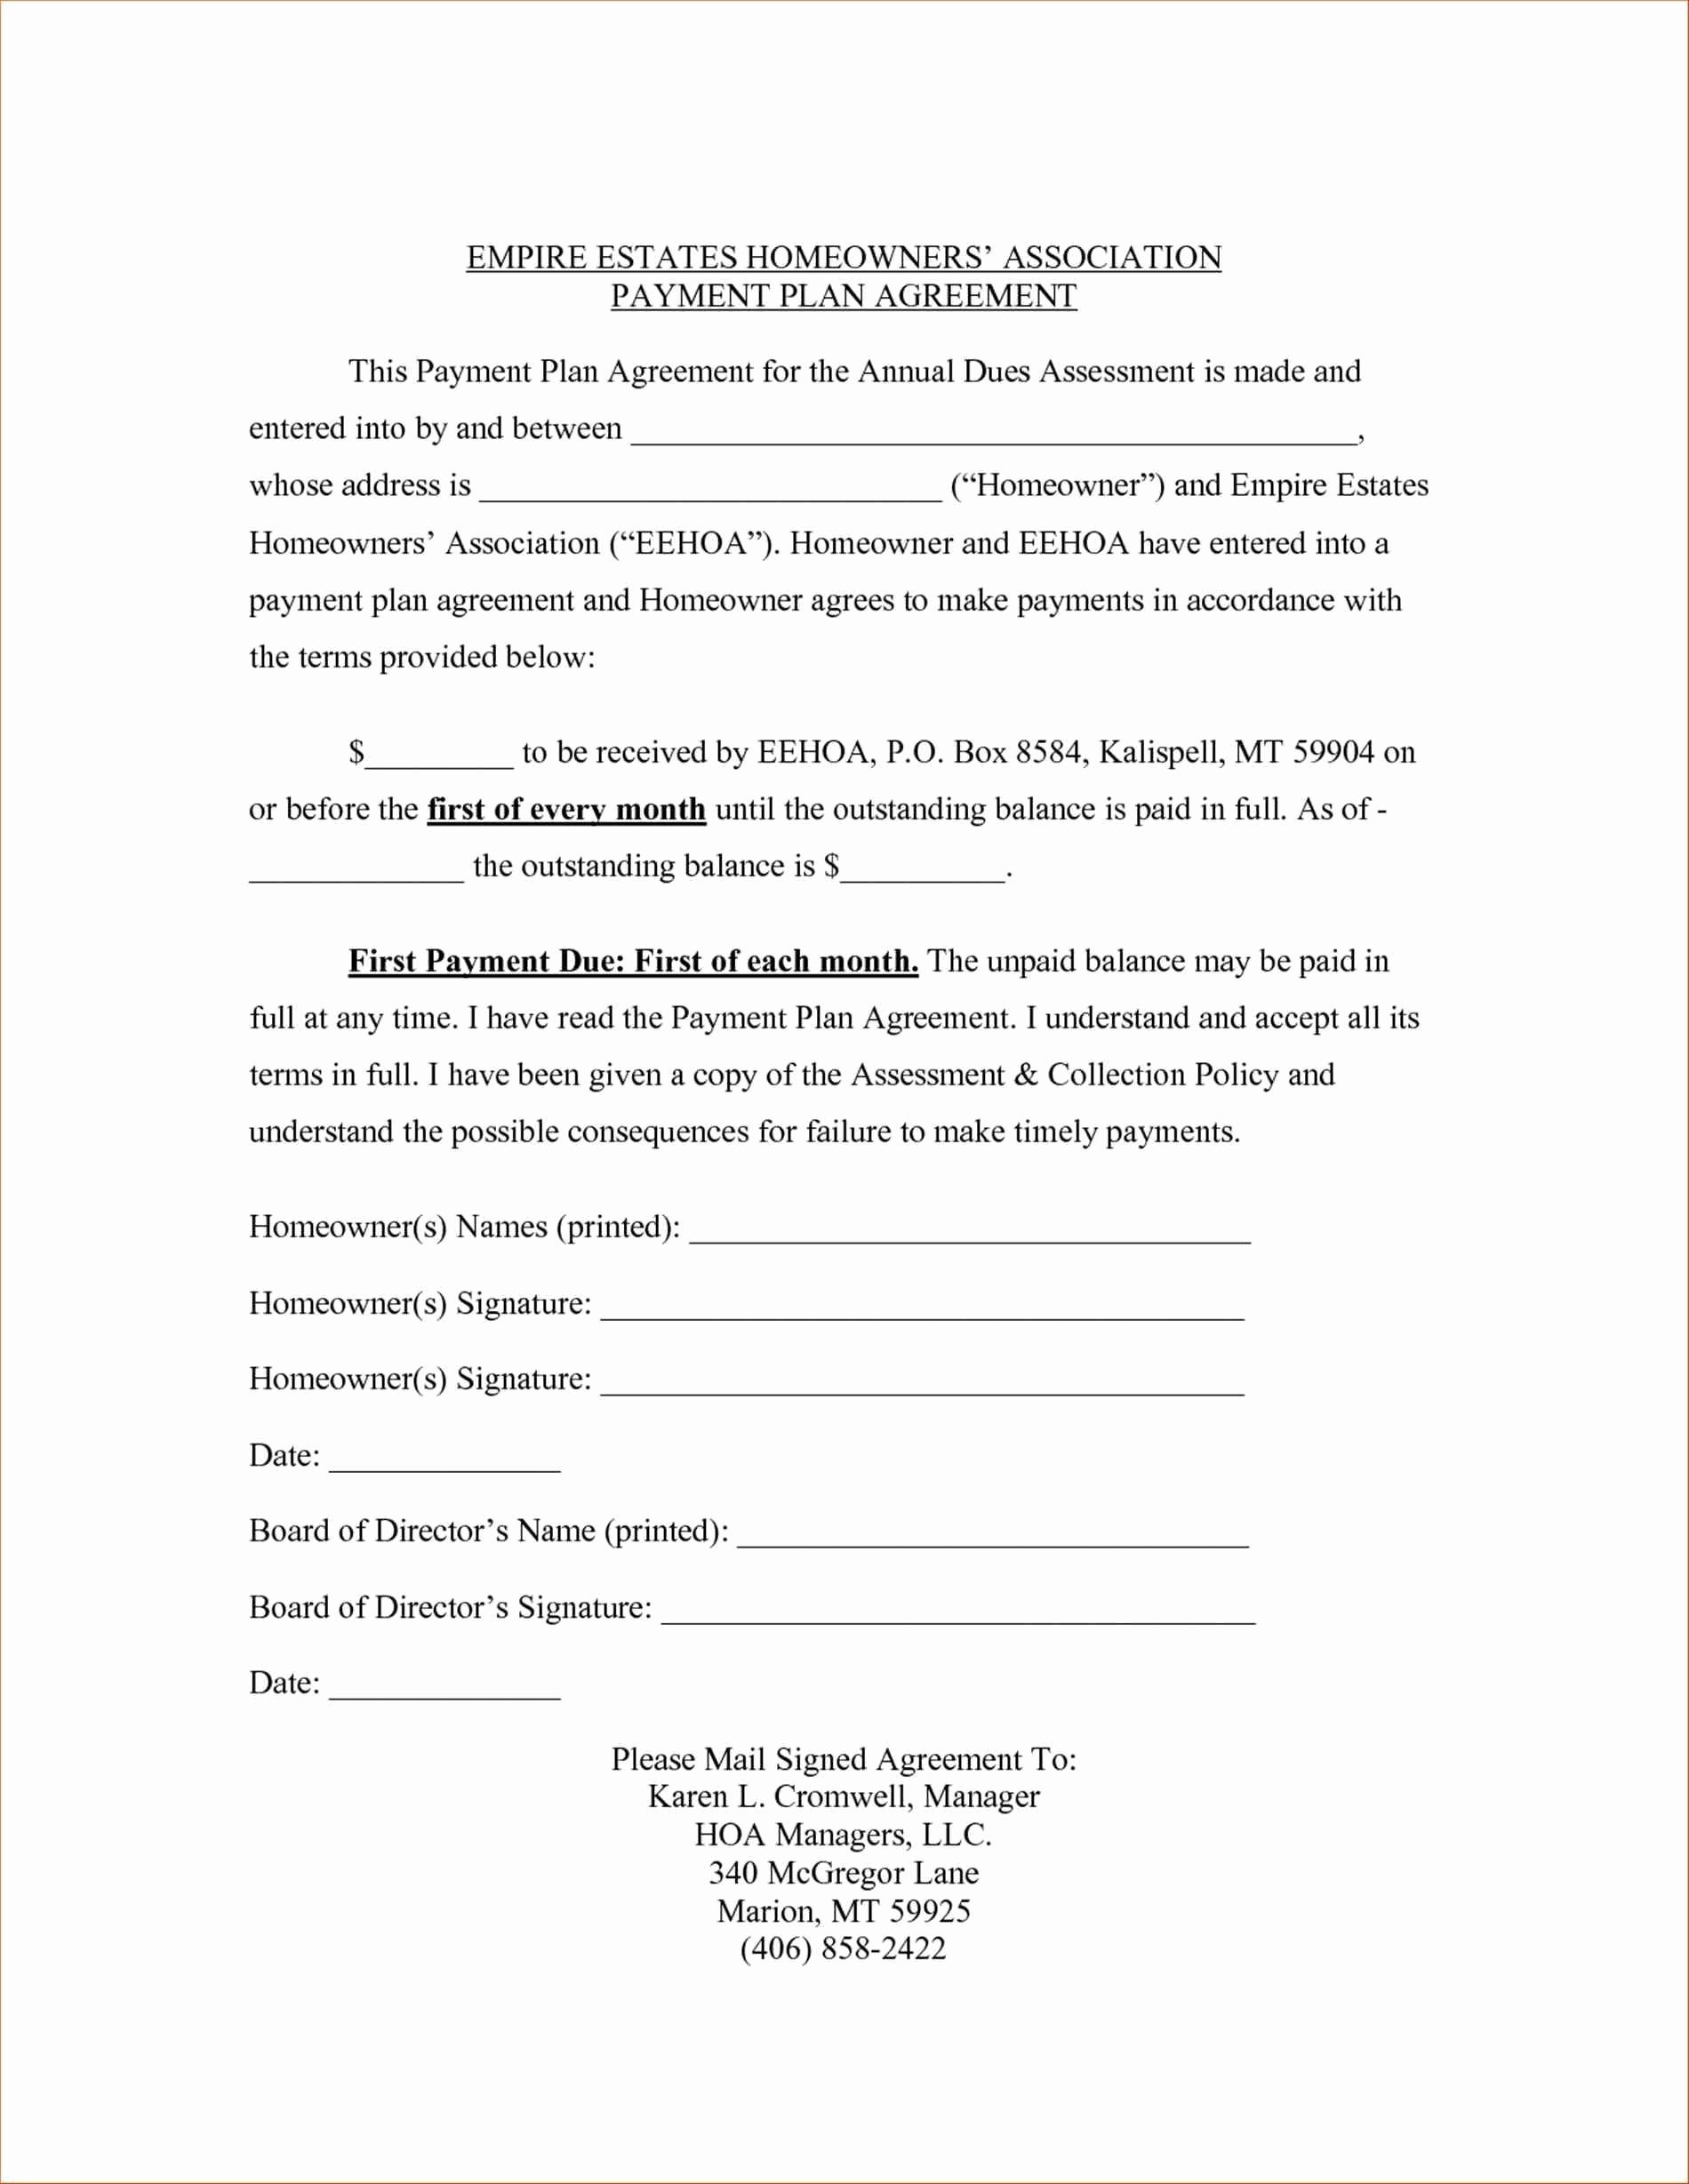 Car Accident Payment Agreement Letter Sample Fresh Image Result for Payment Plan Contract Agreement Template